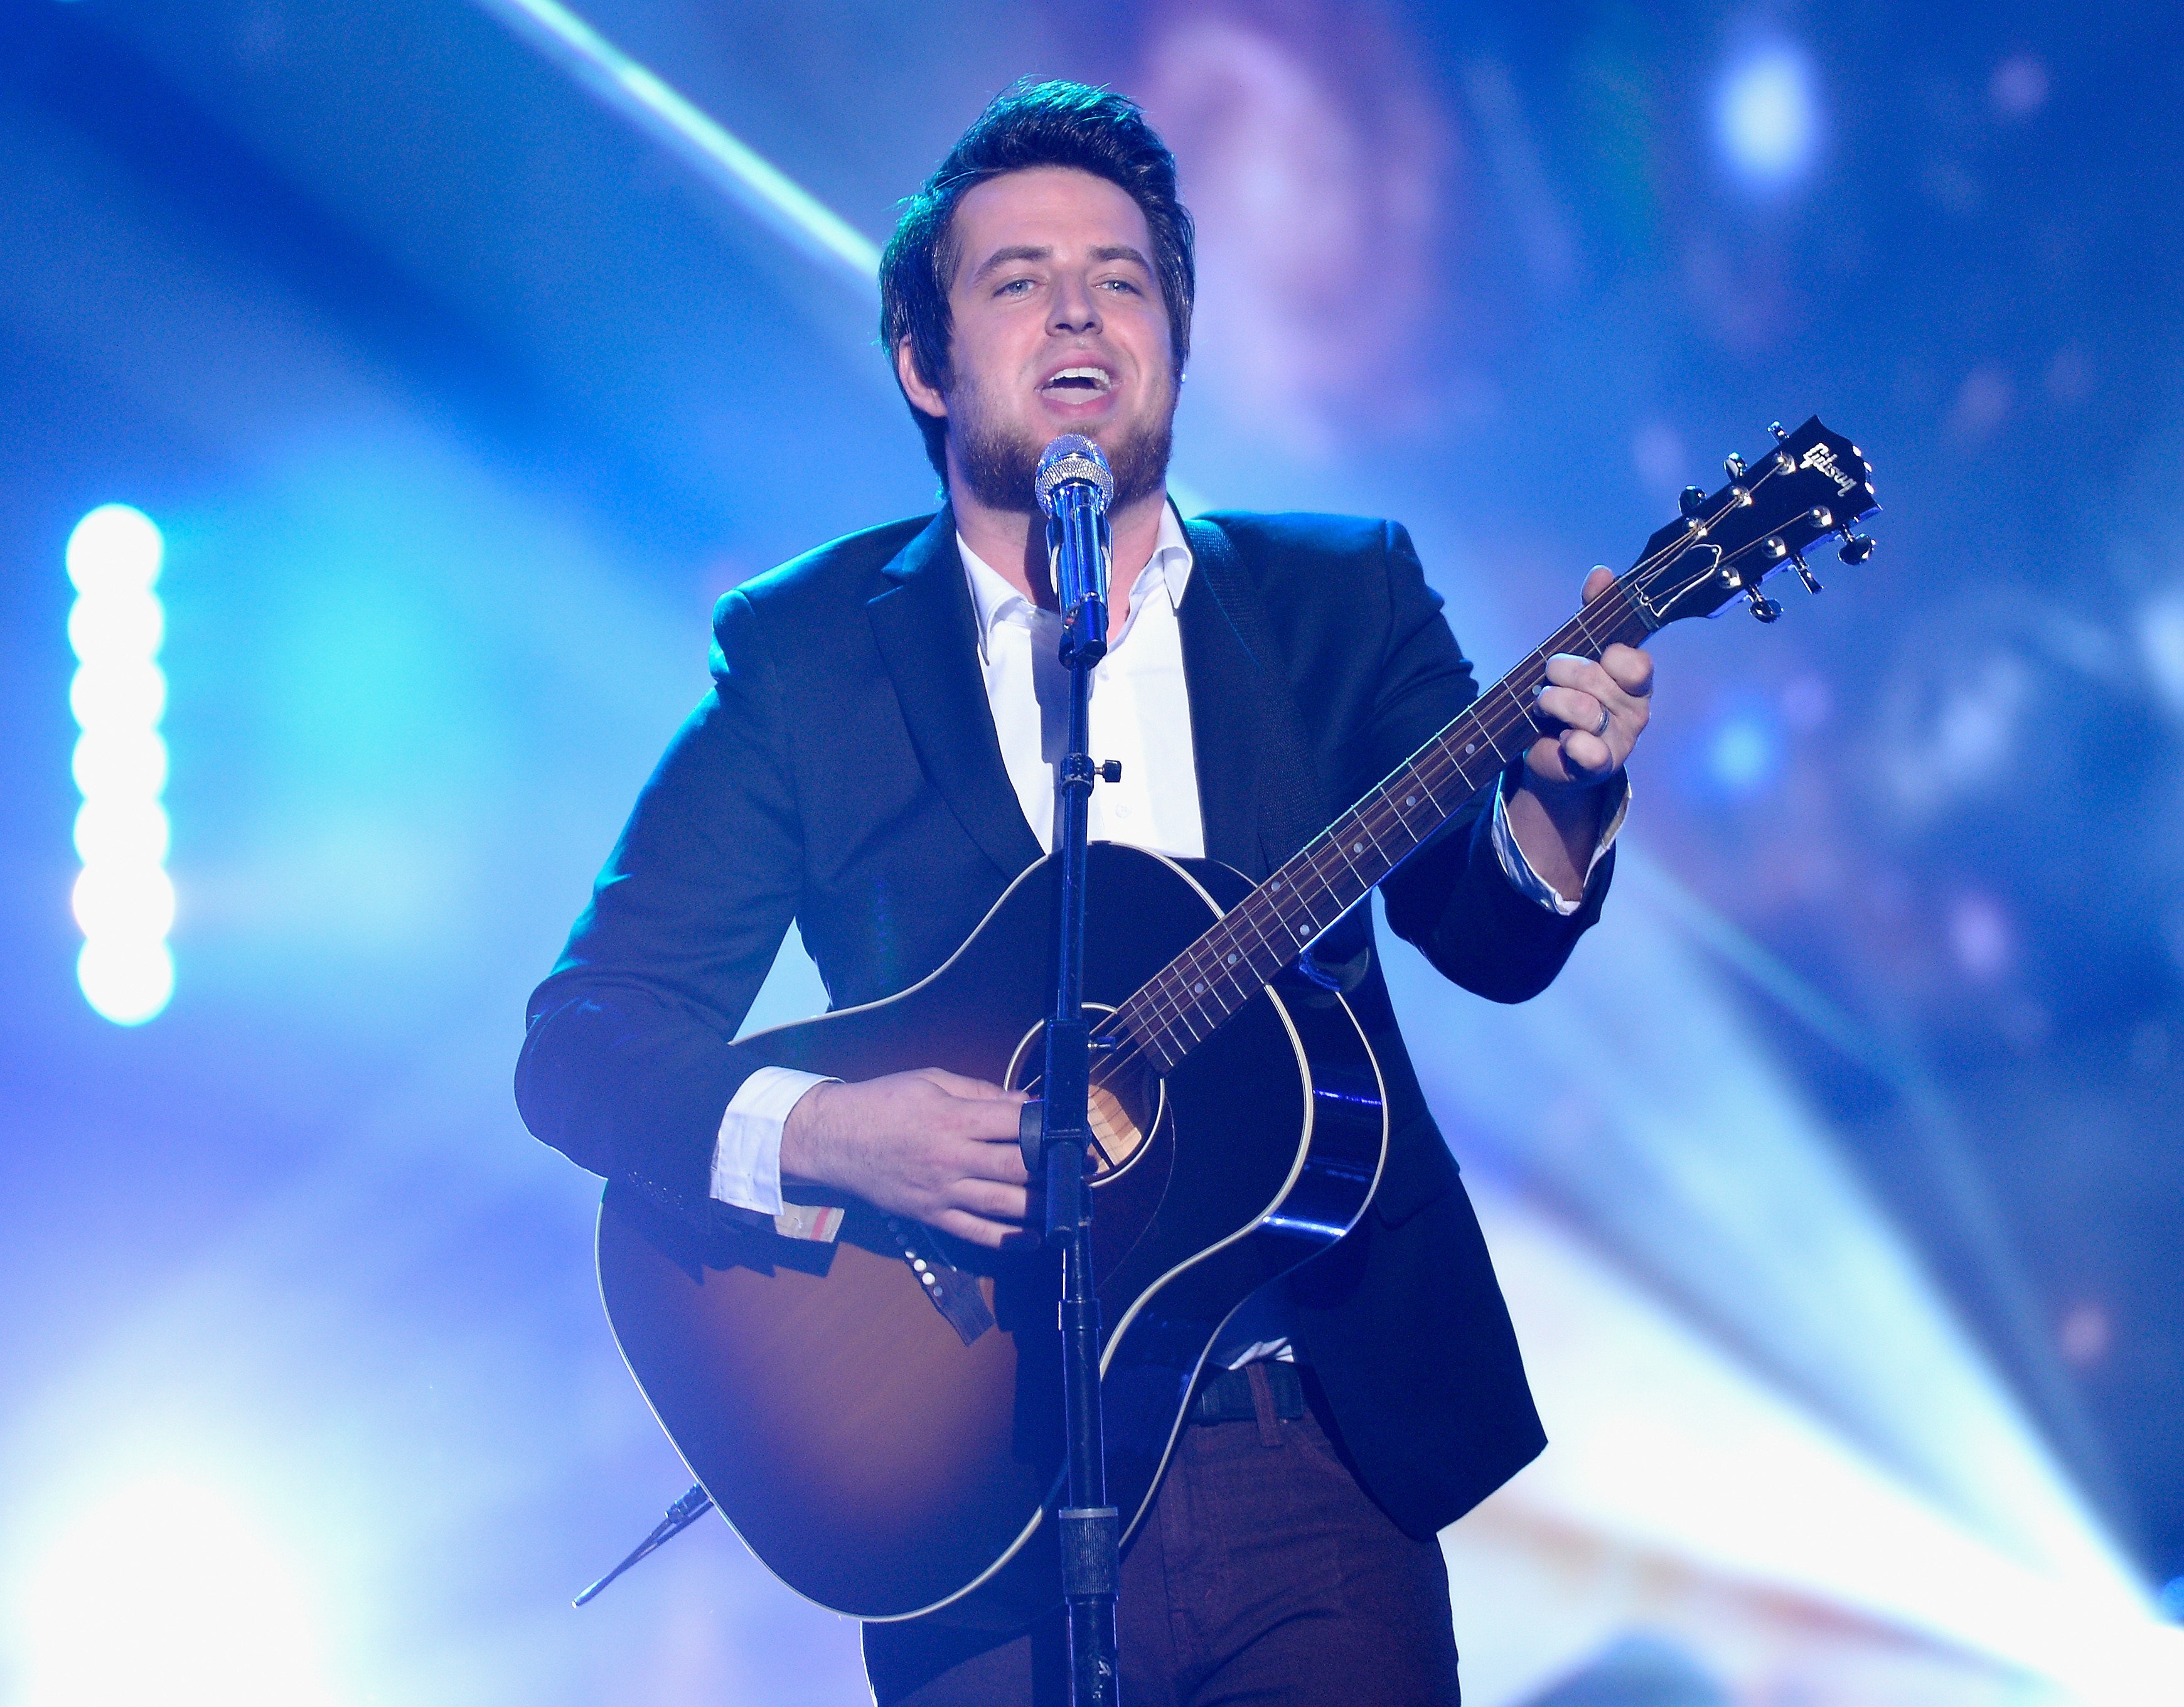 Life after 'American Idol': Lee DeWyze's 'Walking Dead' connection, return  to Eddie's Attic March 30